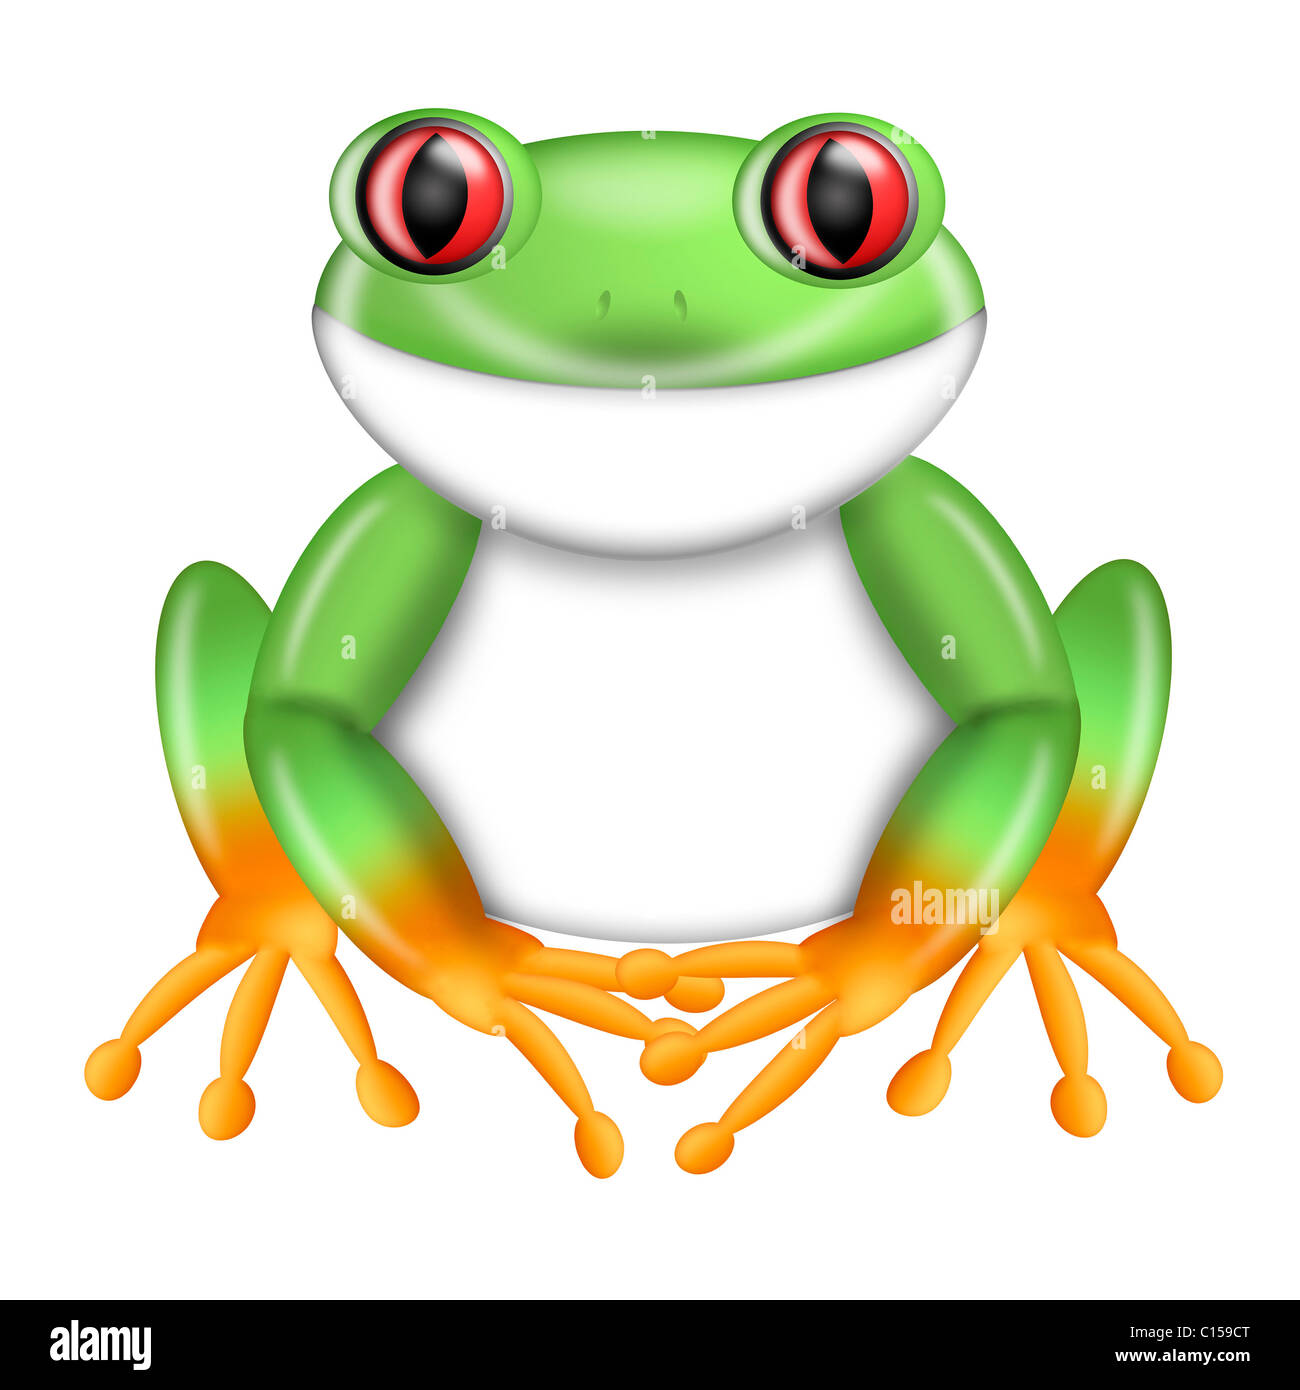 Red-Eyed Green Tree Frog Agalychnis callidryas from Costa Rica Illustration  Stock Photo - Alamy